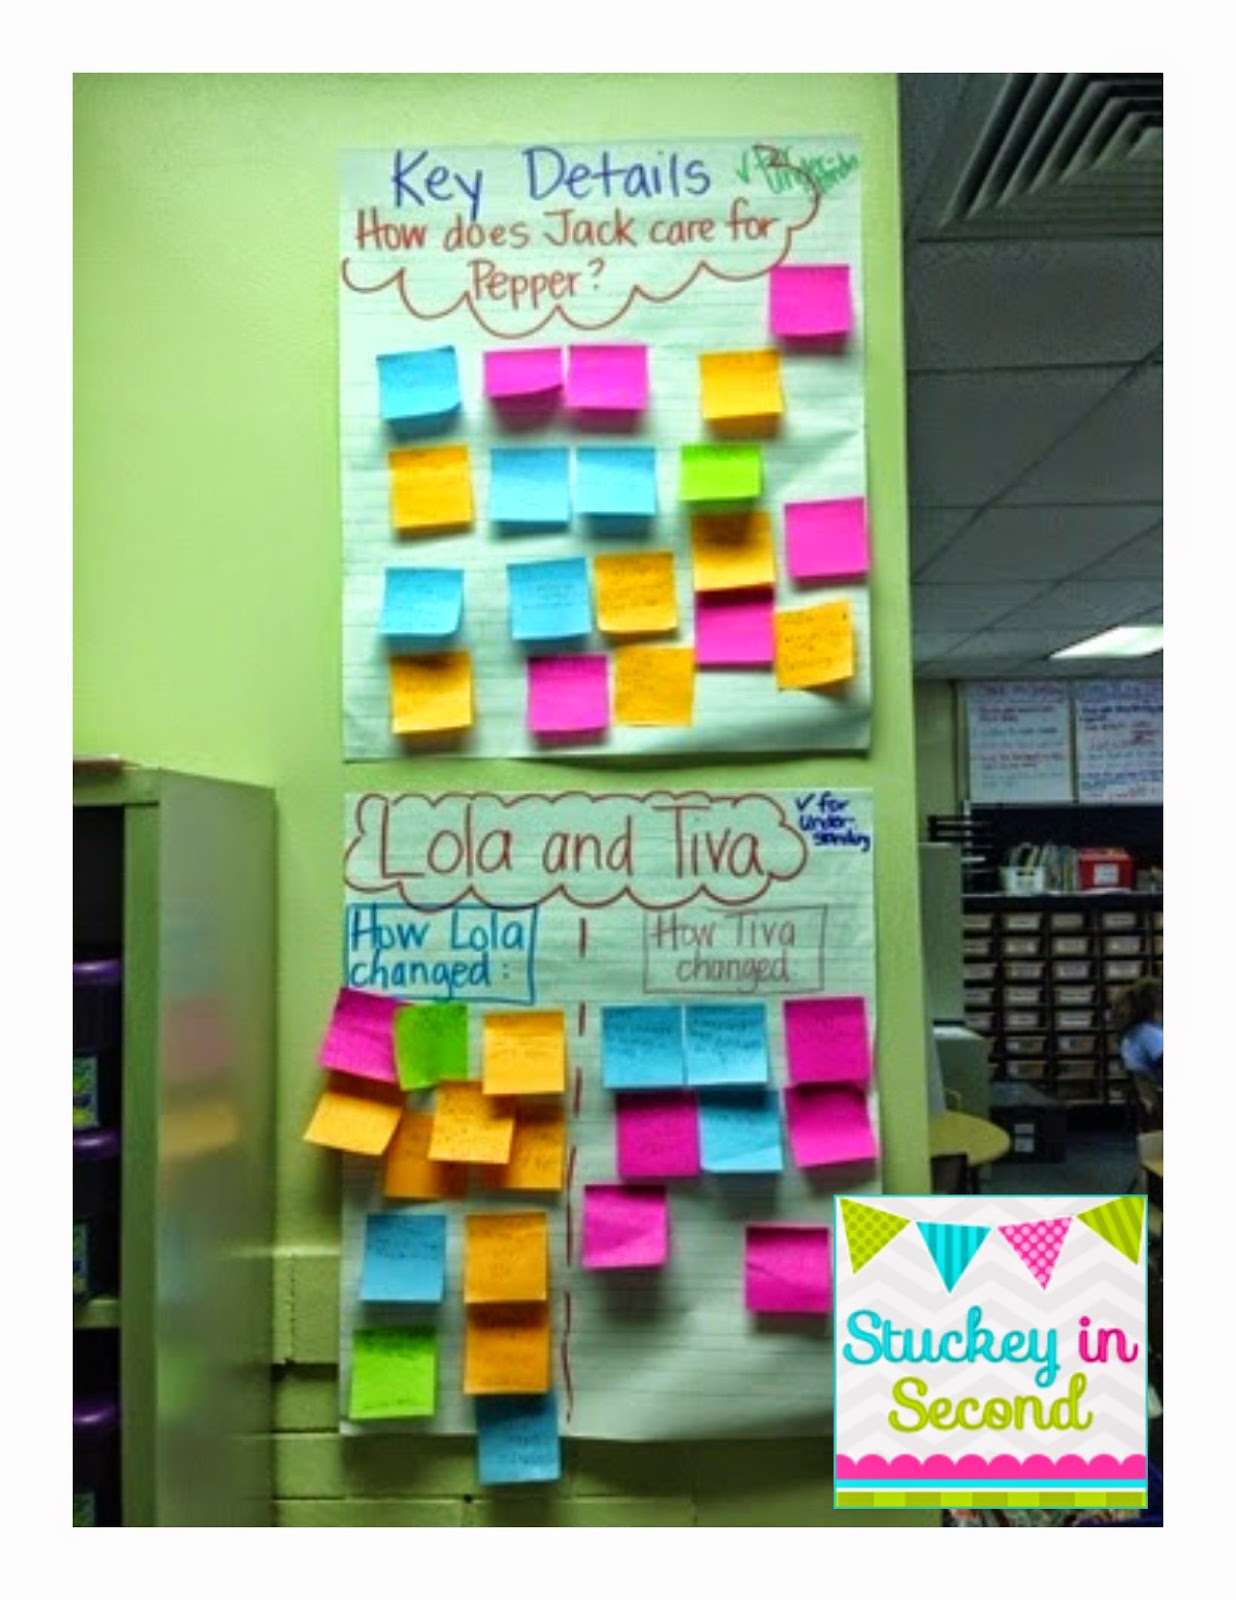 Think Safety Post-it Notes